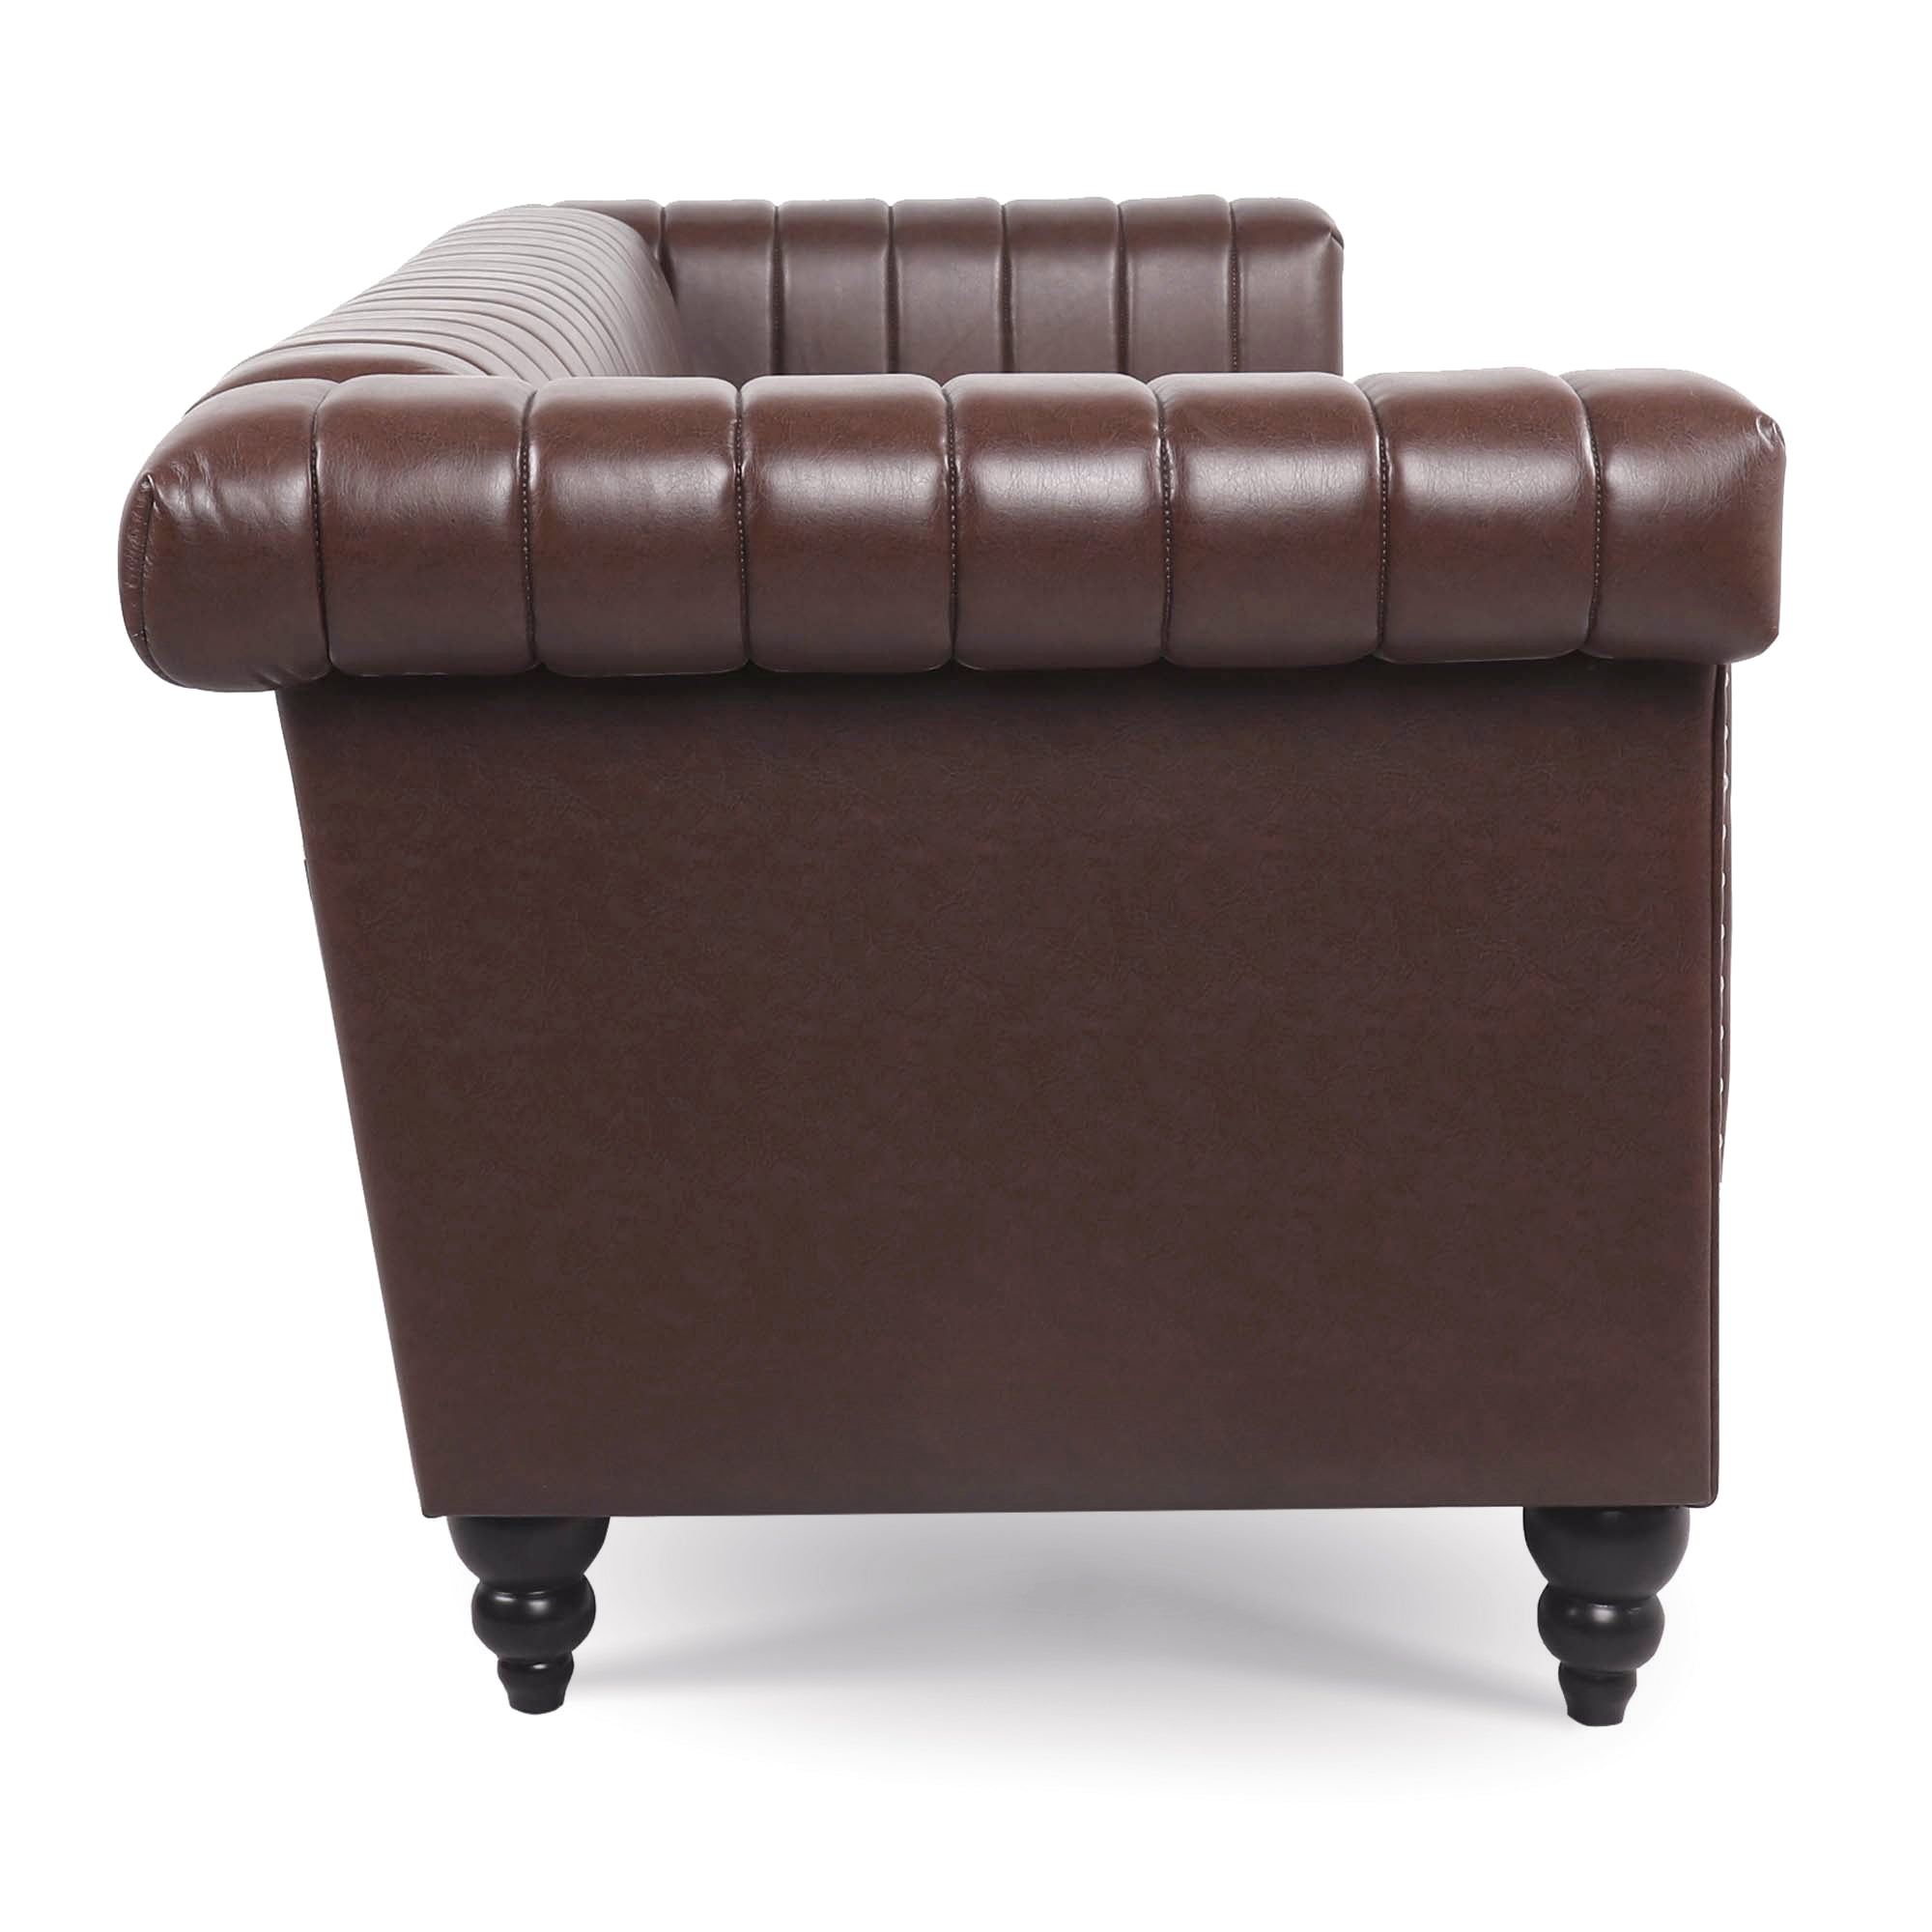 Auston 83" Brown Faux Leather Chesterfield Sofa